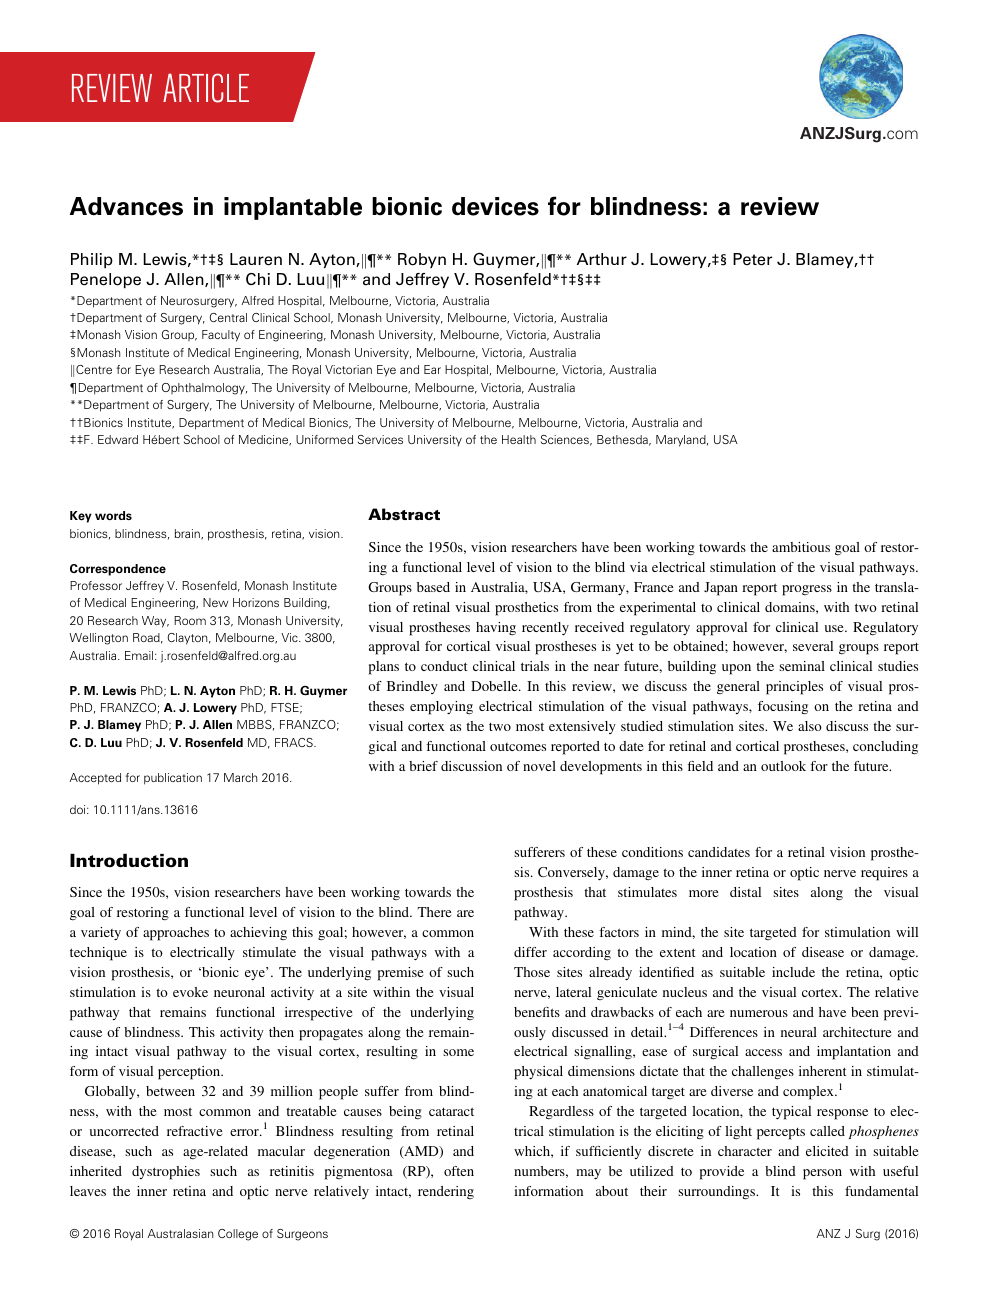 Advances In Implantable Bionic Devices For Blindness A Review Topic Of Research Paper In Clinical Medicine Download Scholarly Article Pdf And Read For Free On Cyberleninka Open Science Hub